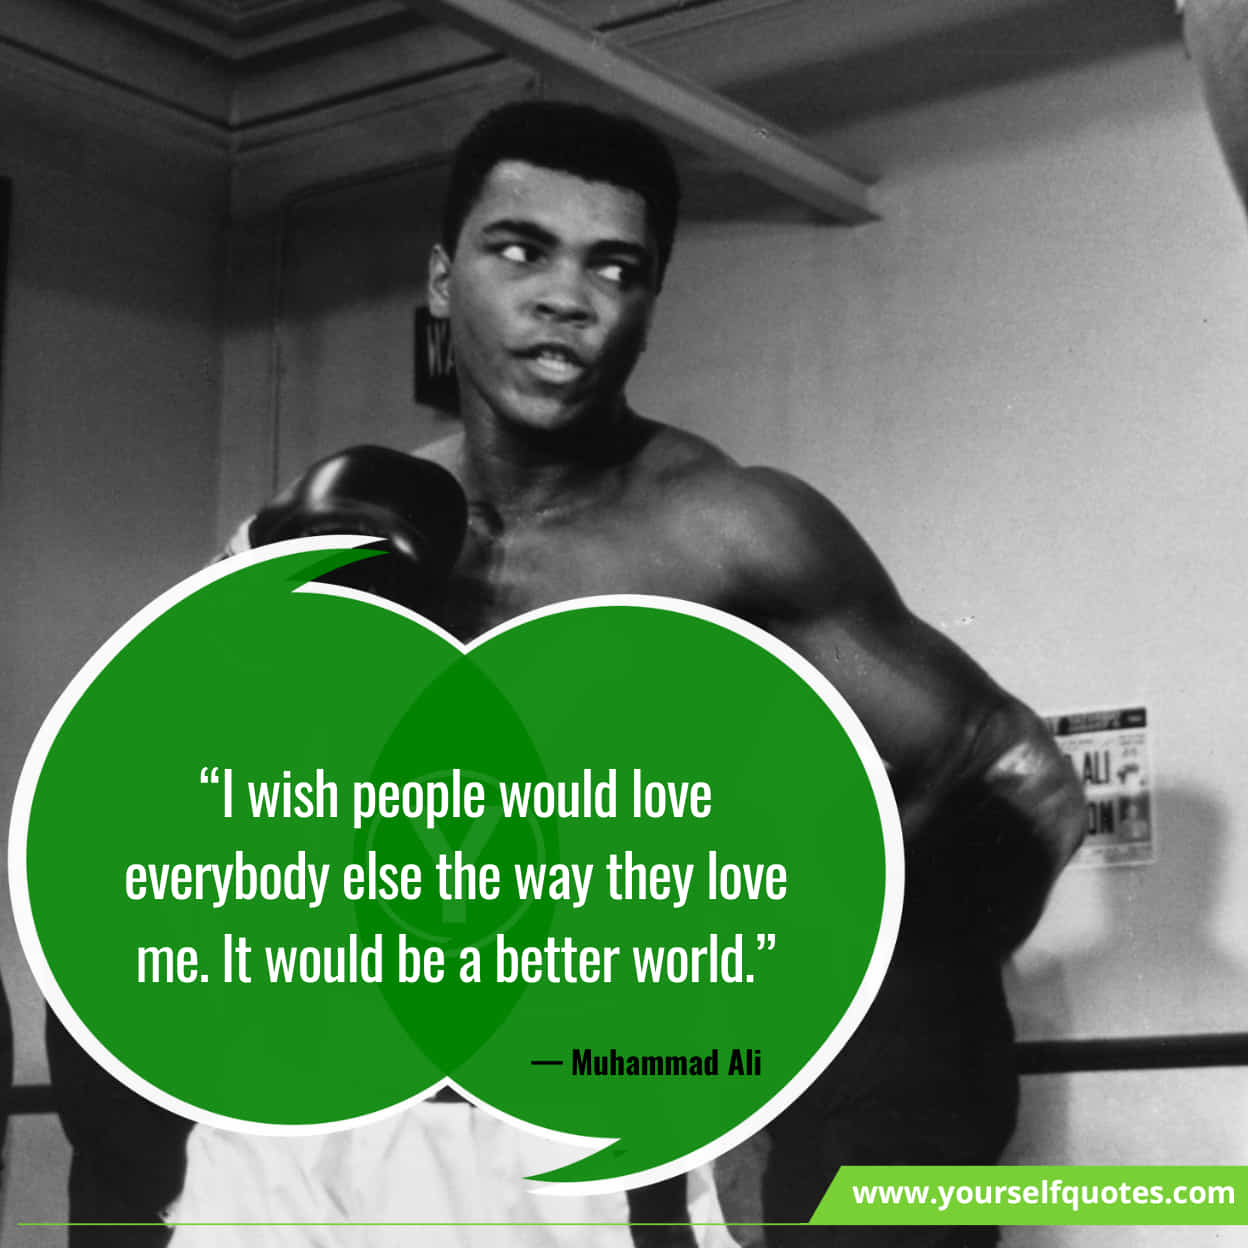 Inspirational Quotes By Muhammad Ali On Life